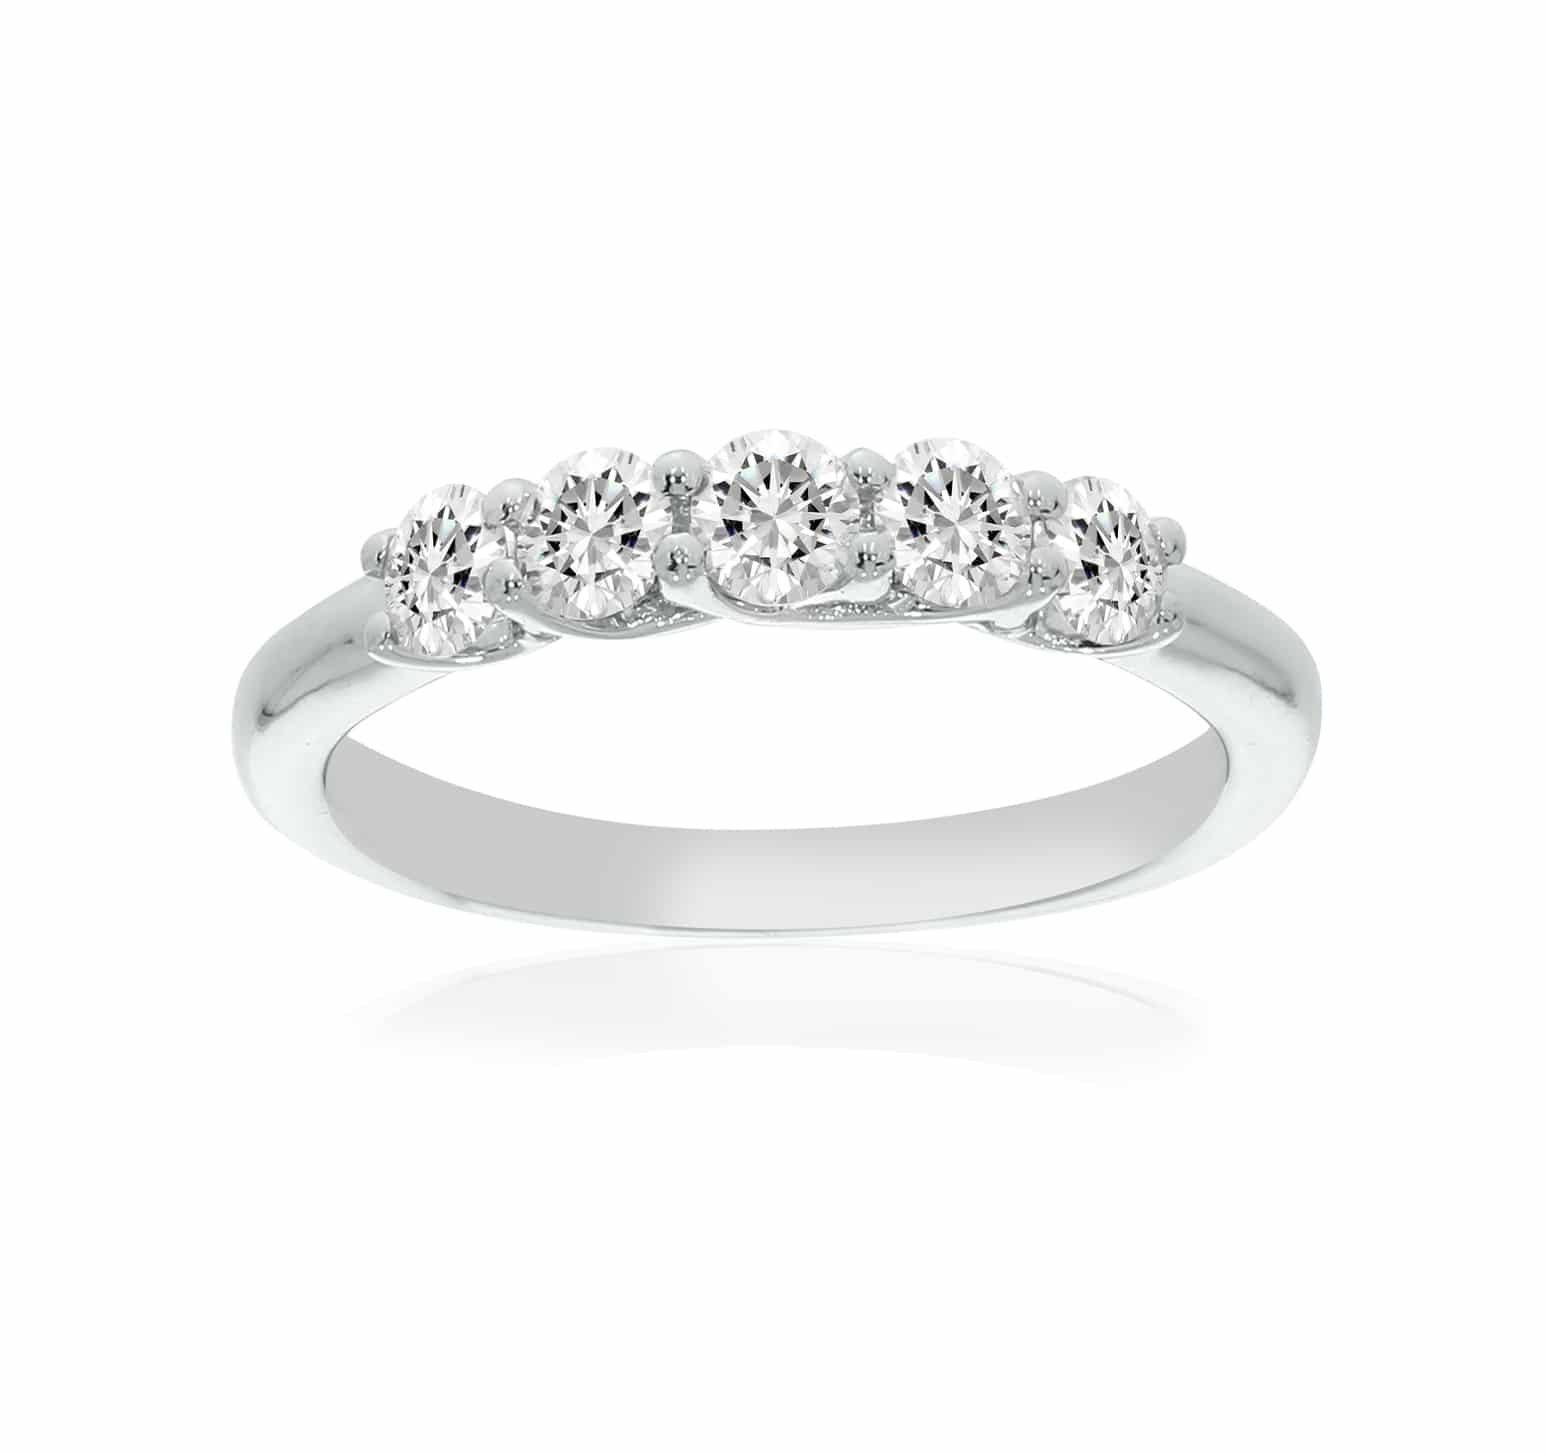 Dainty Wedding Rings Anniversary Bands Promise Rings and Stackable Bands La Joya 1/4 Carat Total Weight Solid 10k White Gold Certified Lab Grown Diamond Rings for Women ctw Ring Size 9.5